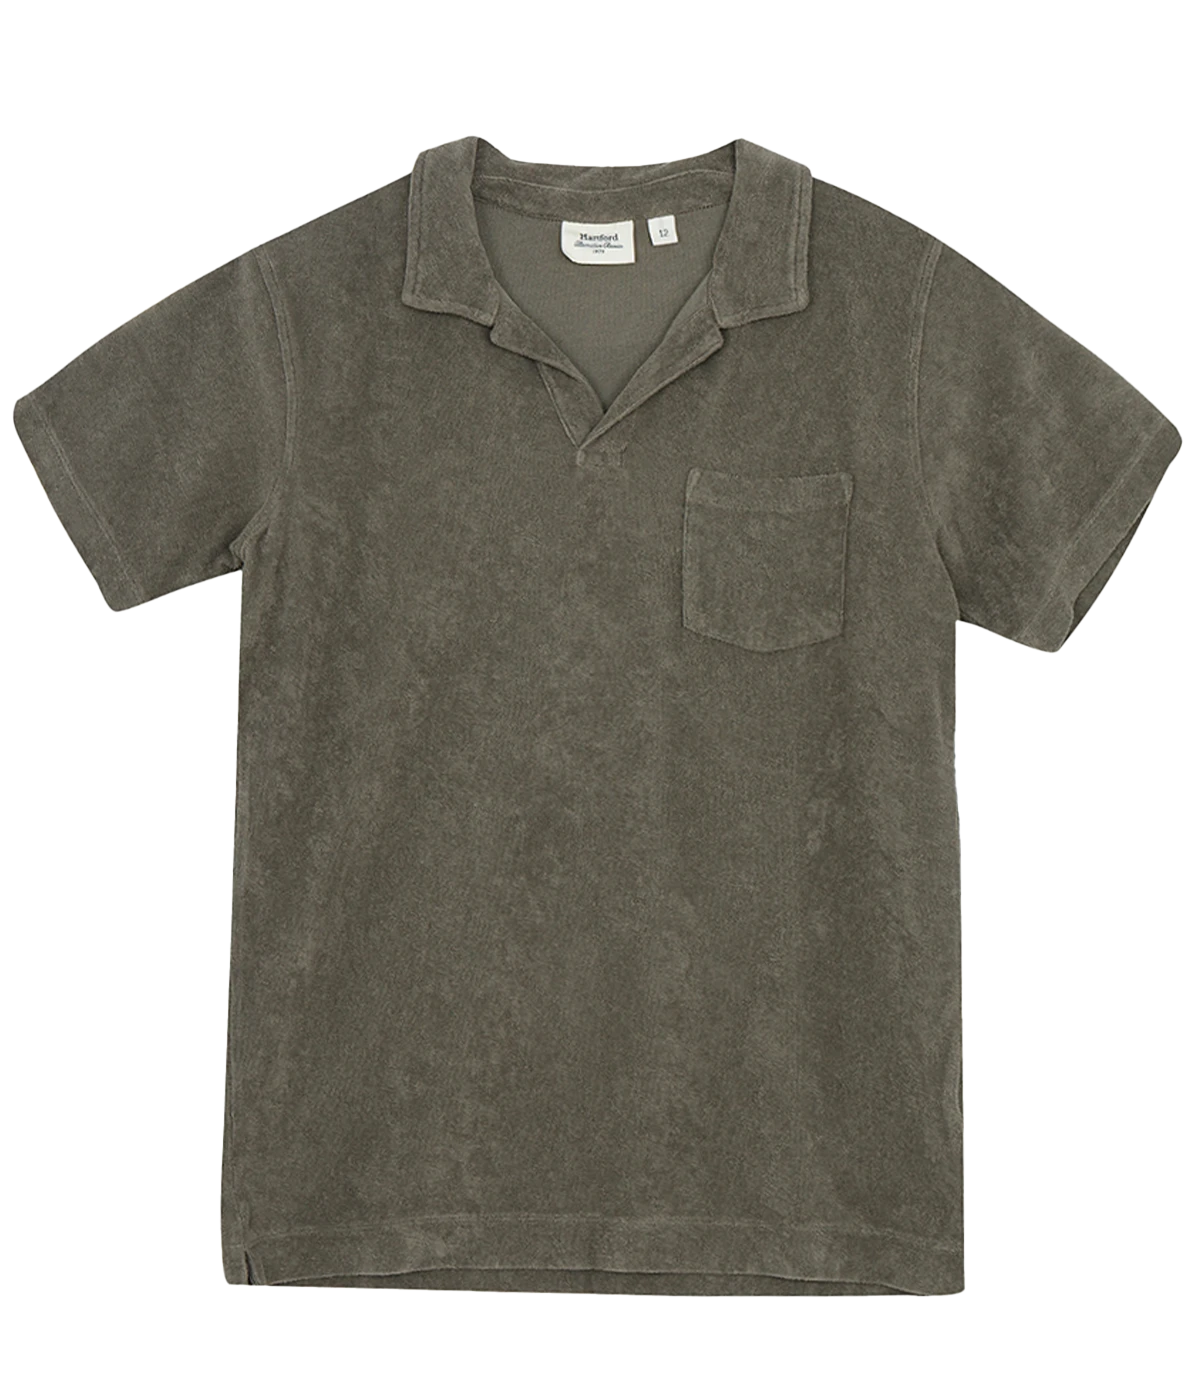 Bouclette Polo in Military